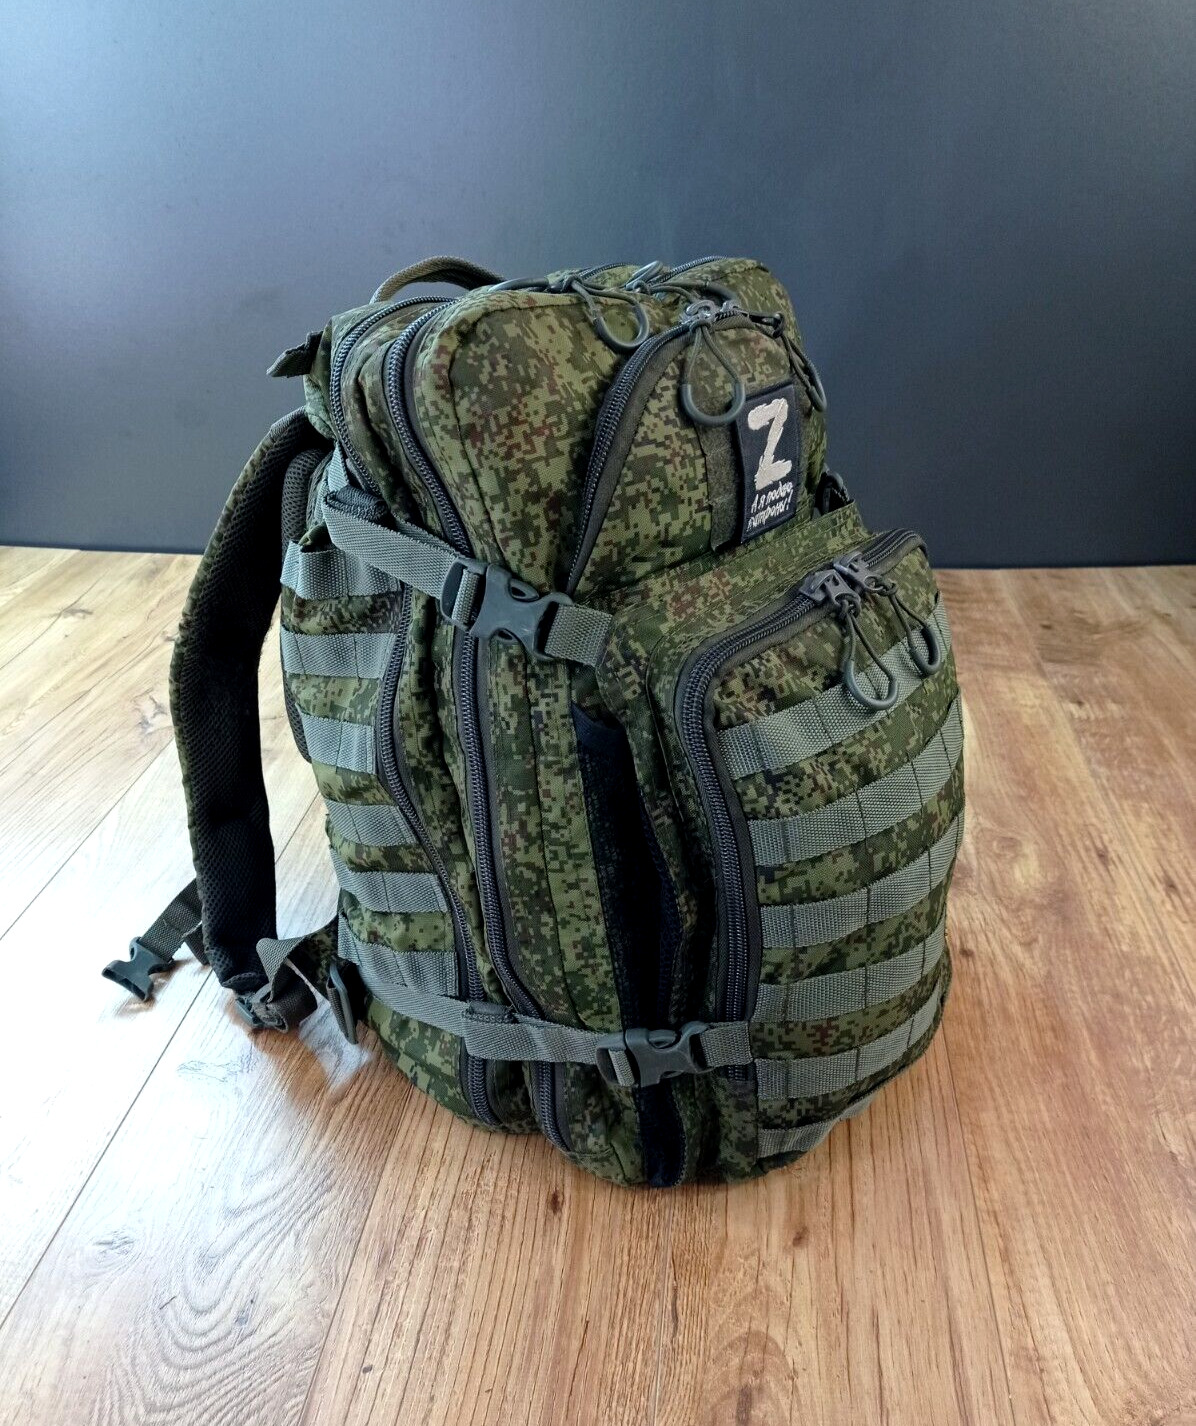 Used military soldier assault backpack of the Russian Army